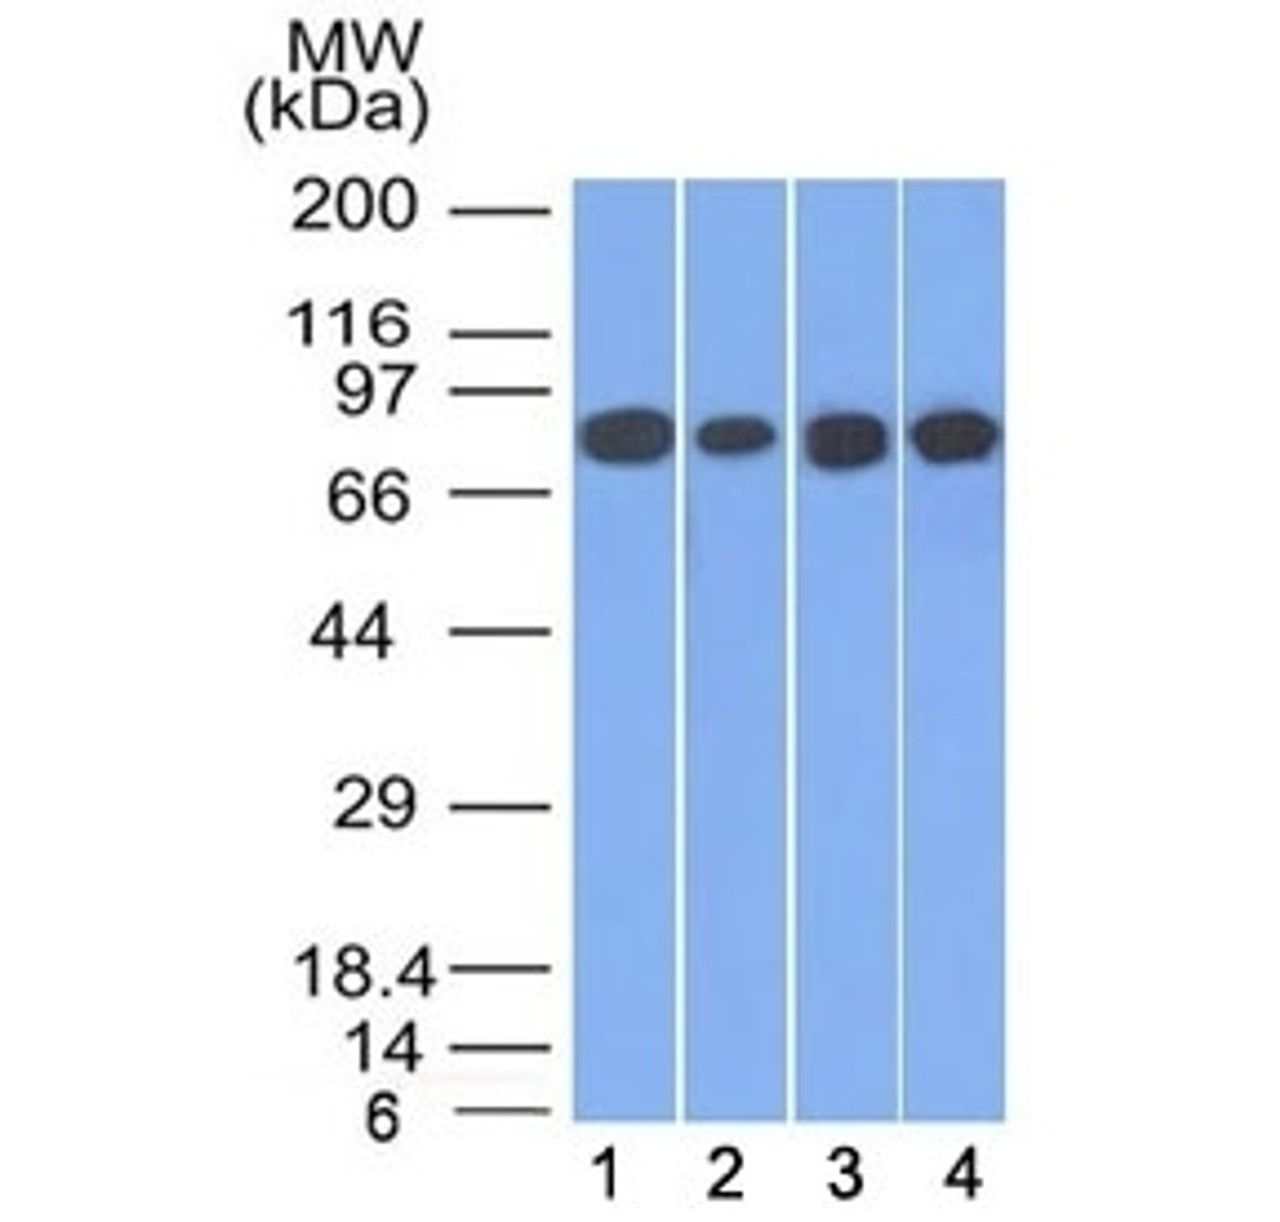 Western blot testing of human 1) HT20, 2) A549, 3) HEK293 and 4) A431 cell lysate with Plakoglobin antibody (clone 11E4) . Predicted molecular weight: 80-87 kDa.